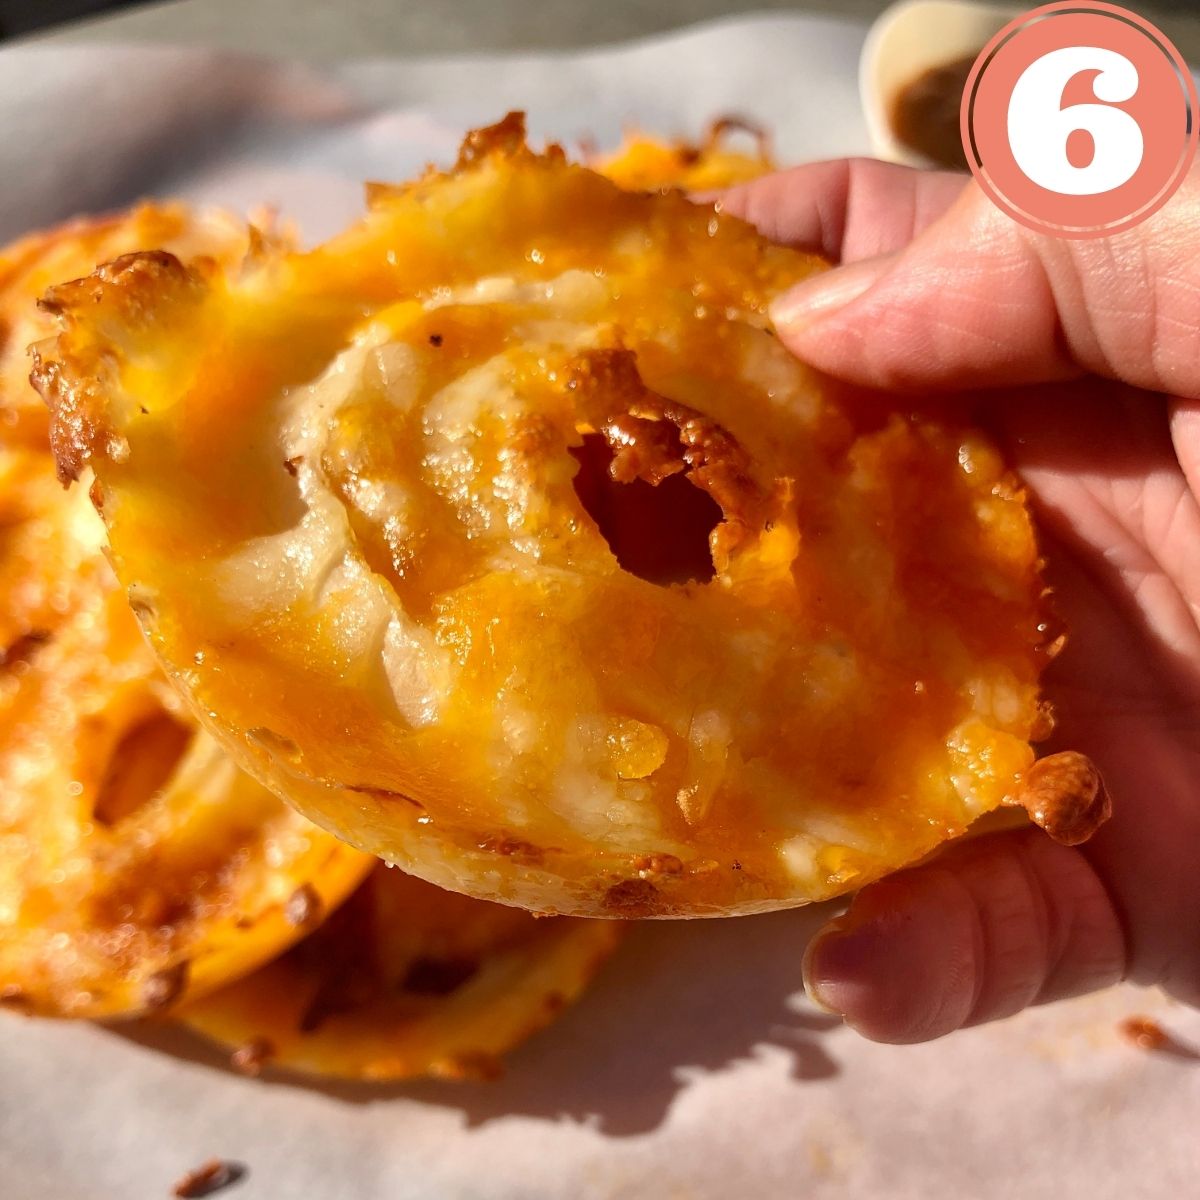 a hand holding a homemade cheddar cheese onion ring